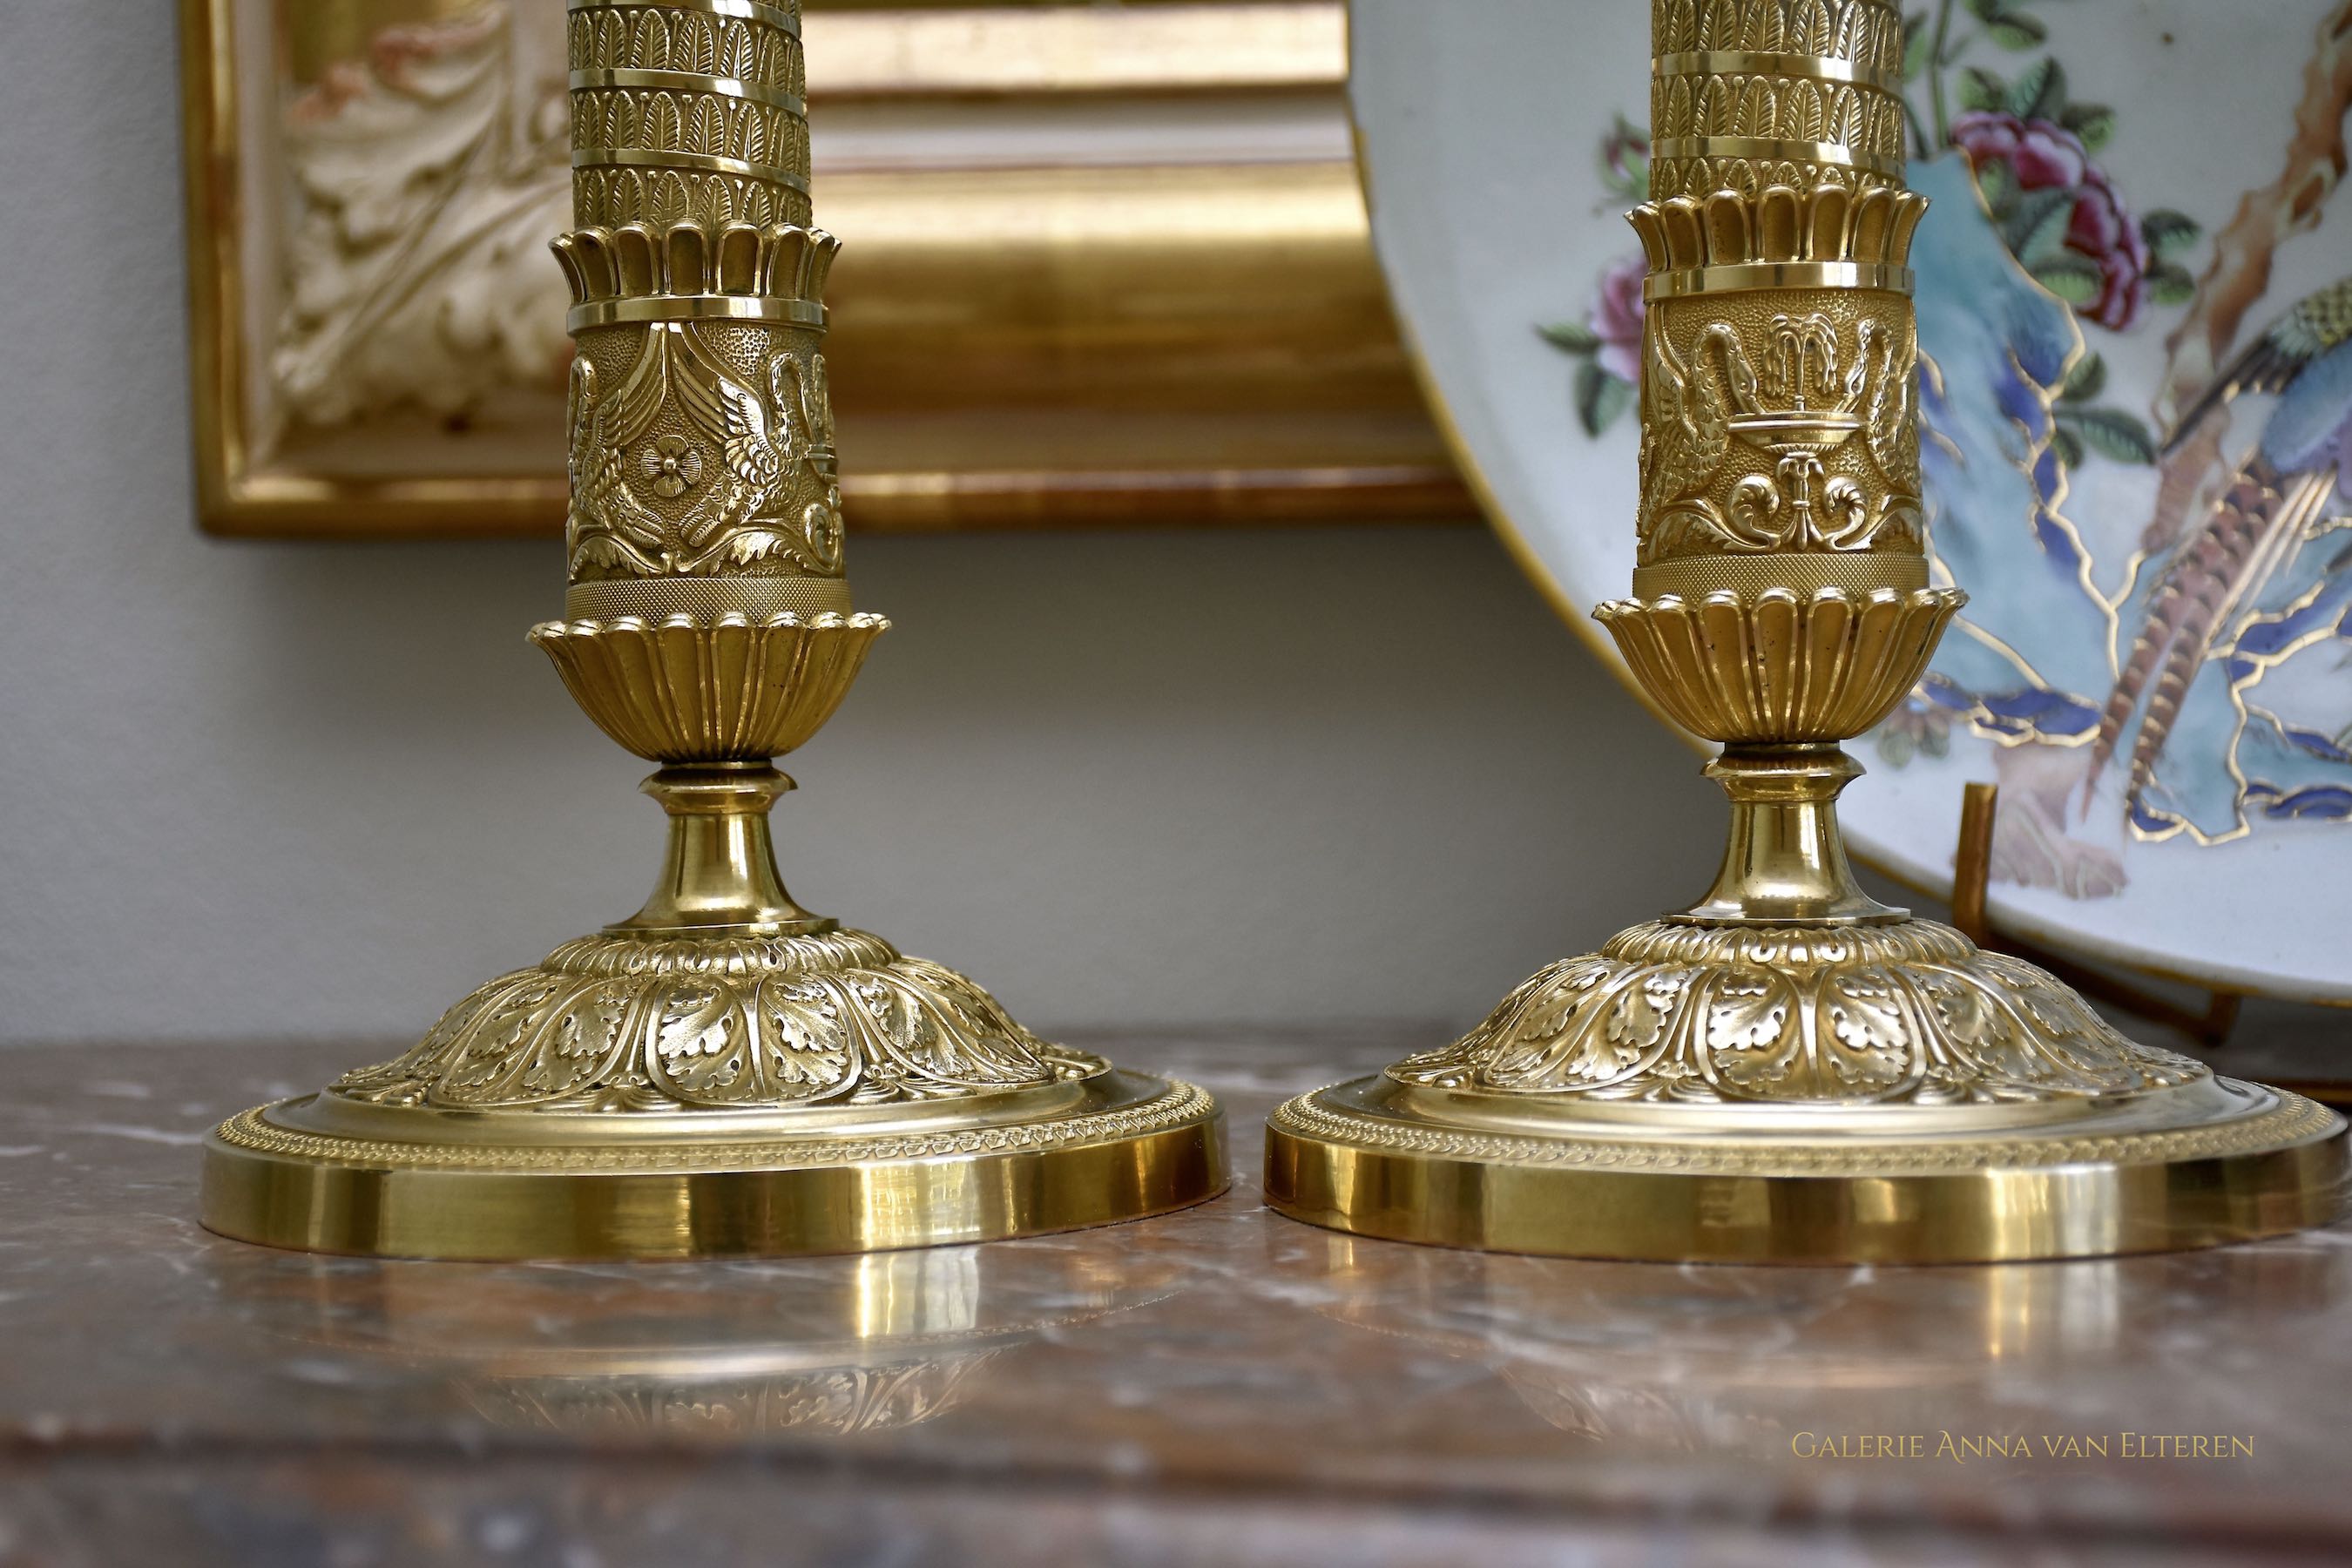 A fine pair of 19th c. gilt and chased bronze candlesticks